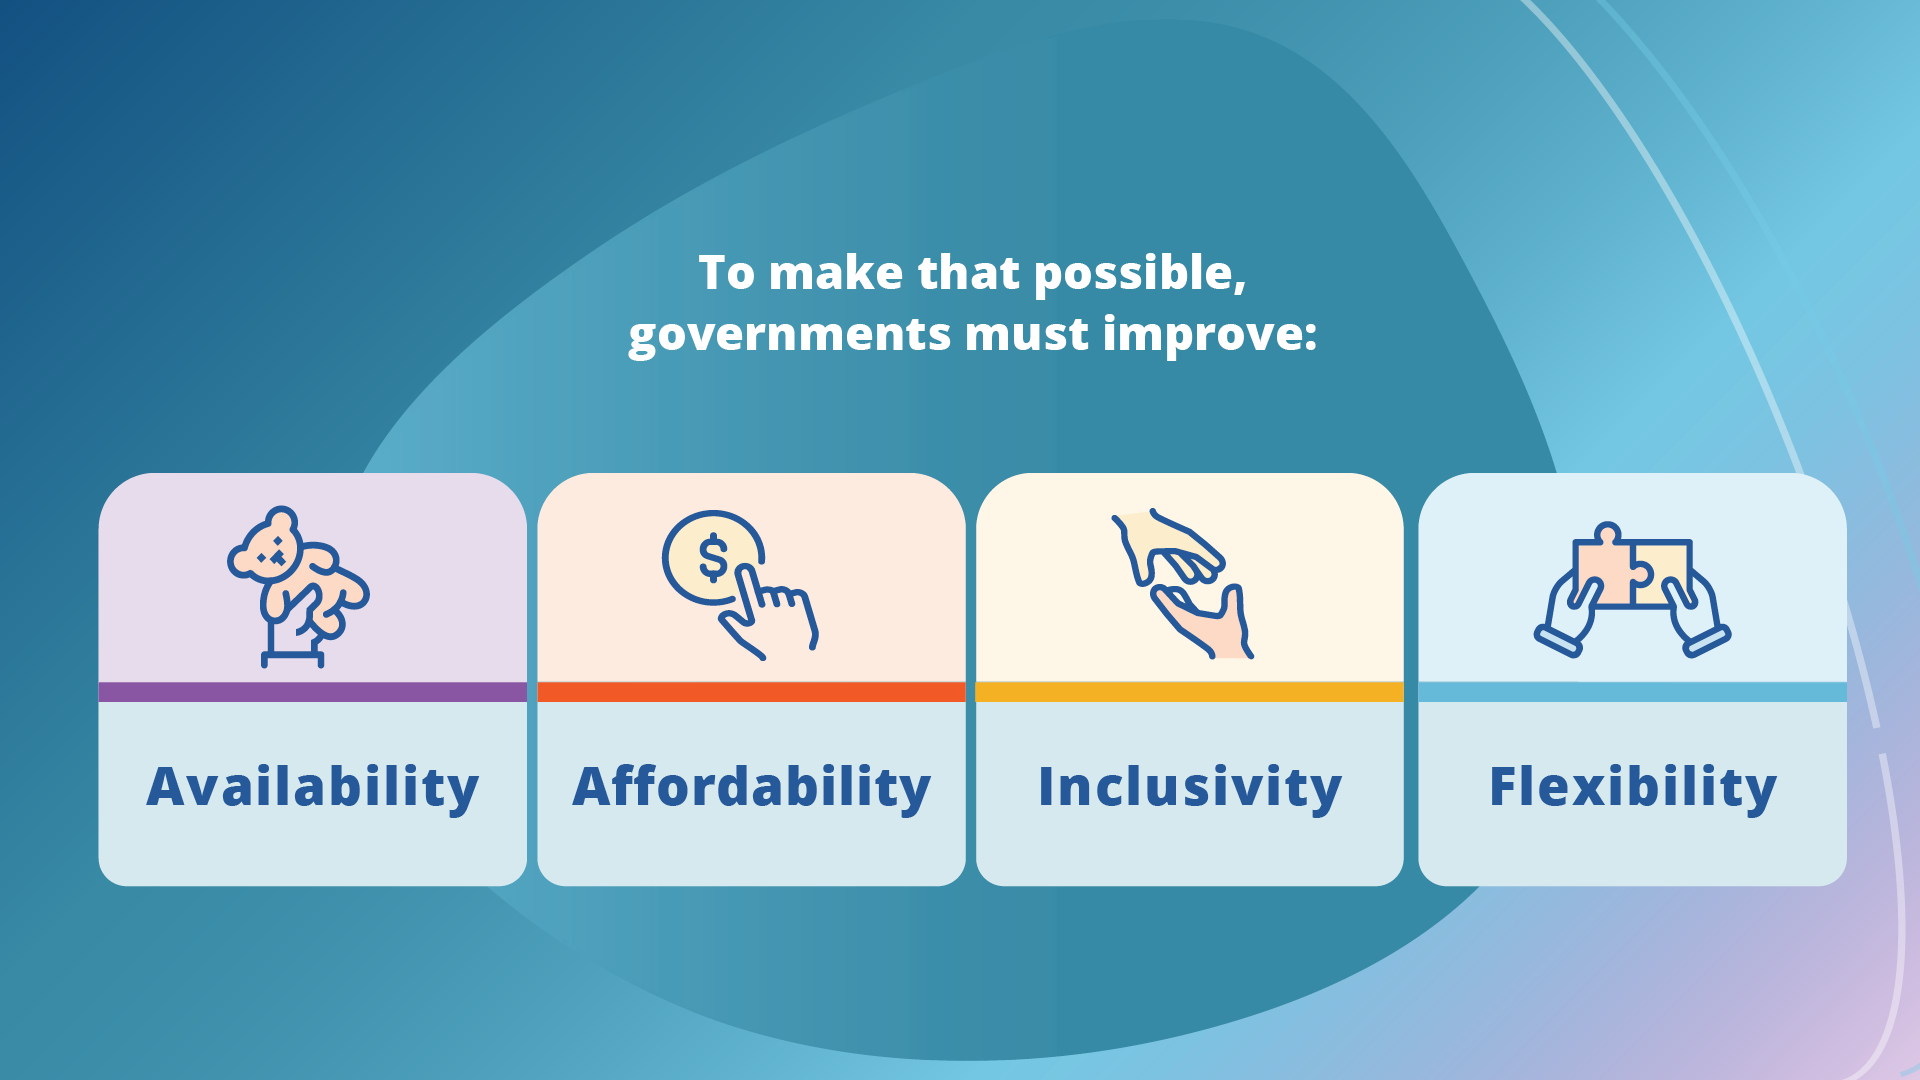 To make that possible, governments must improve: Availability, Affordability, Inclusivity, Flexibility.